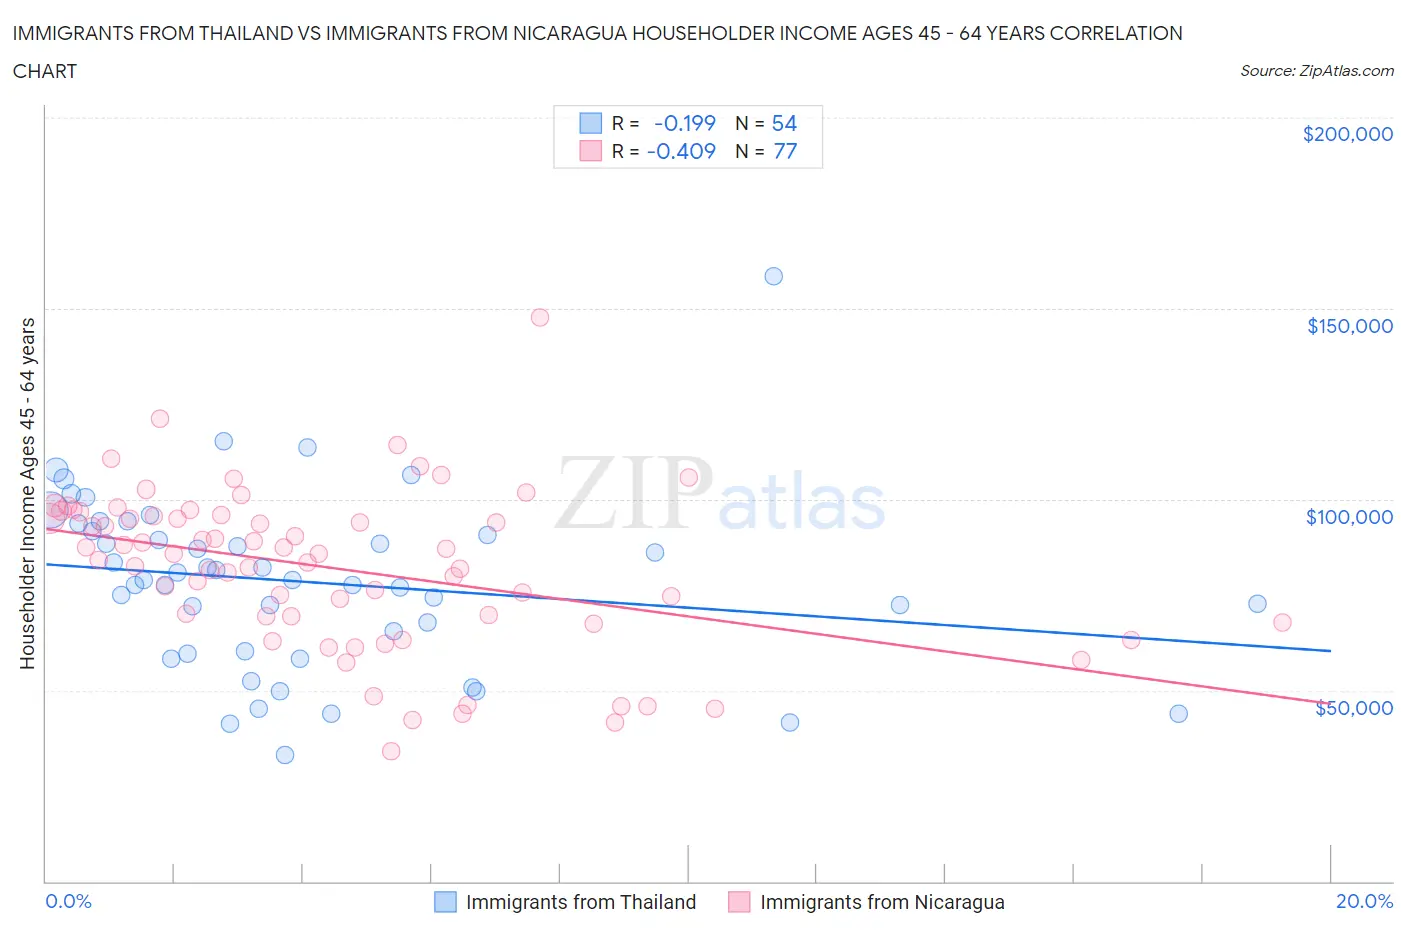 Immigrants from Thailand vs Immigrants from Nicaragua Householder Income Ages 45 - 64 years